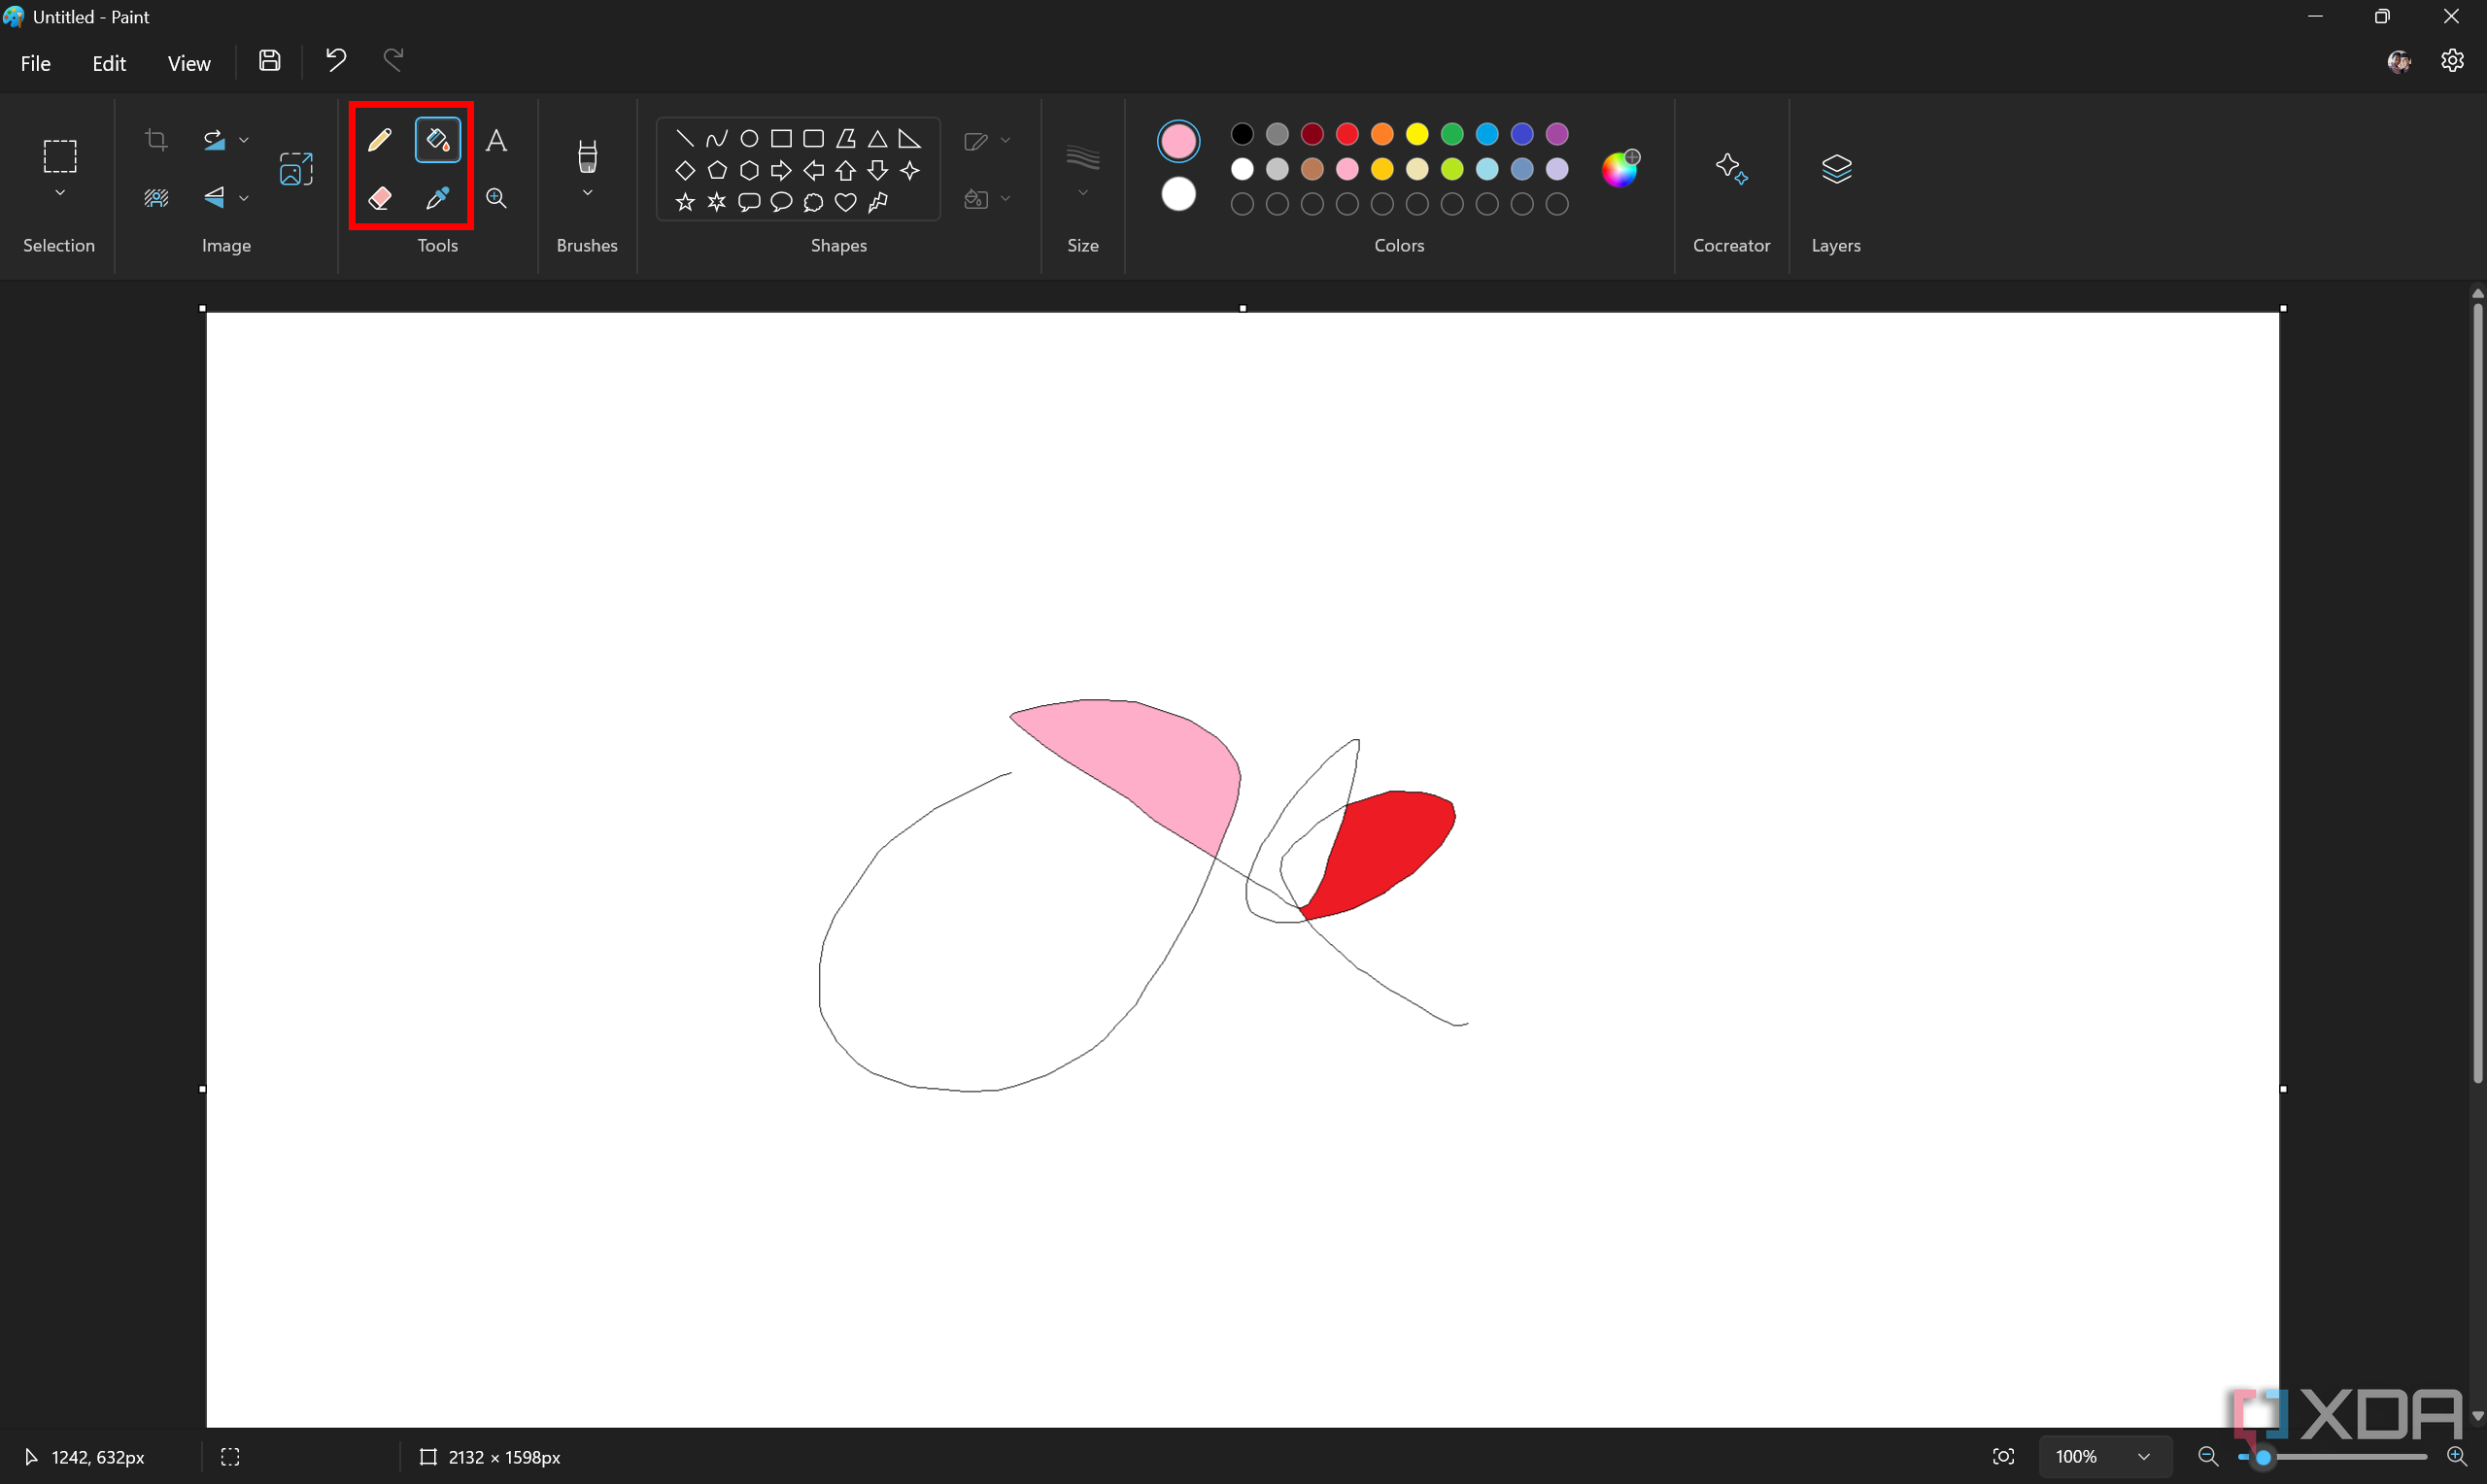 Screenshot of Paint with a crude drawing made using the Pencil and Fill tools, which are highlighted on the toolbar